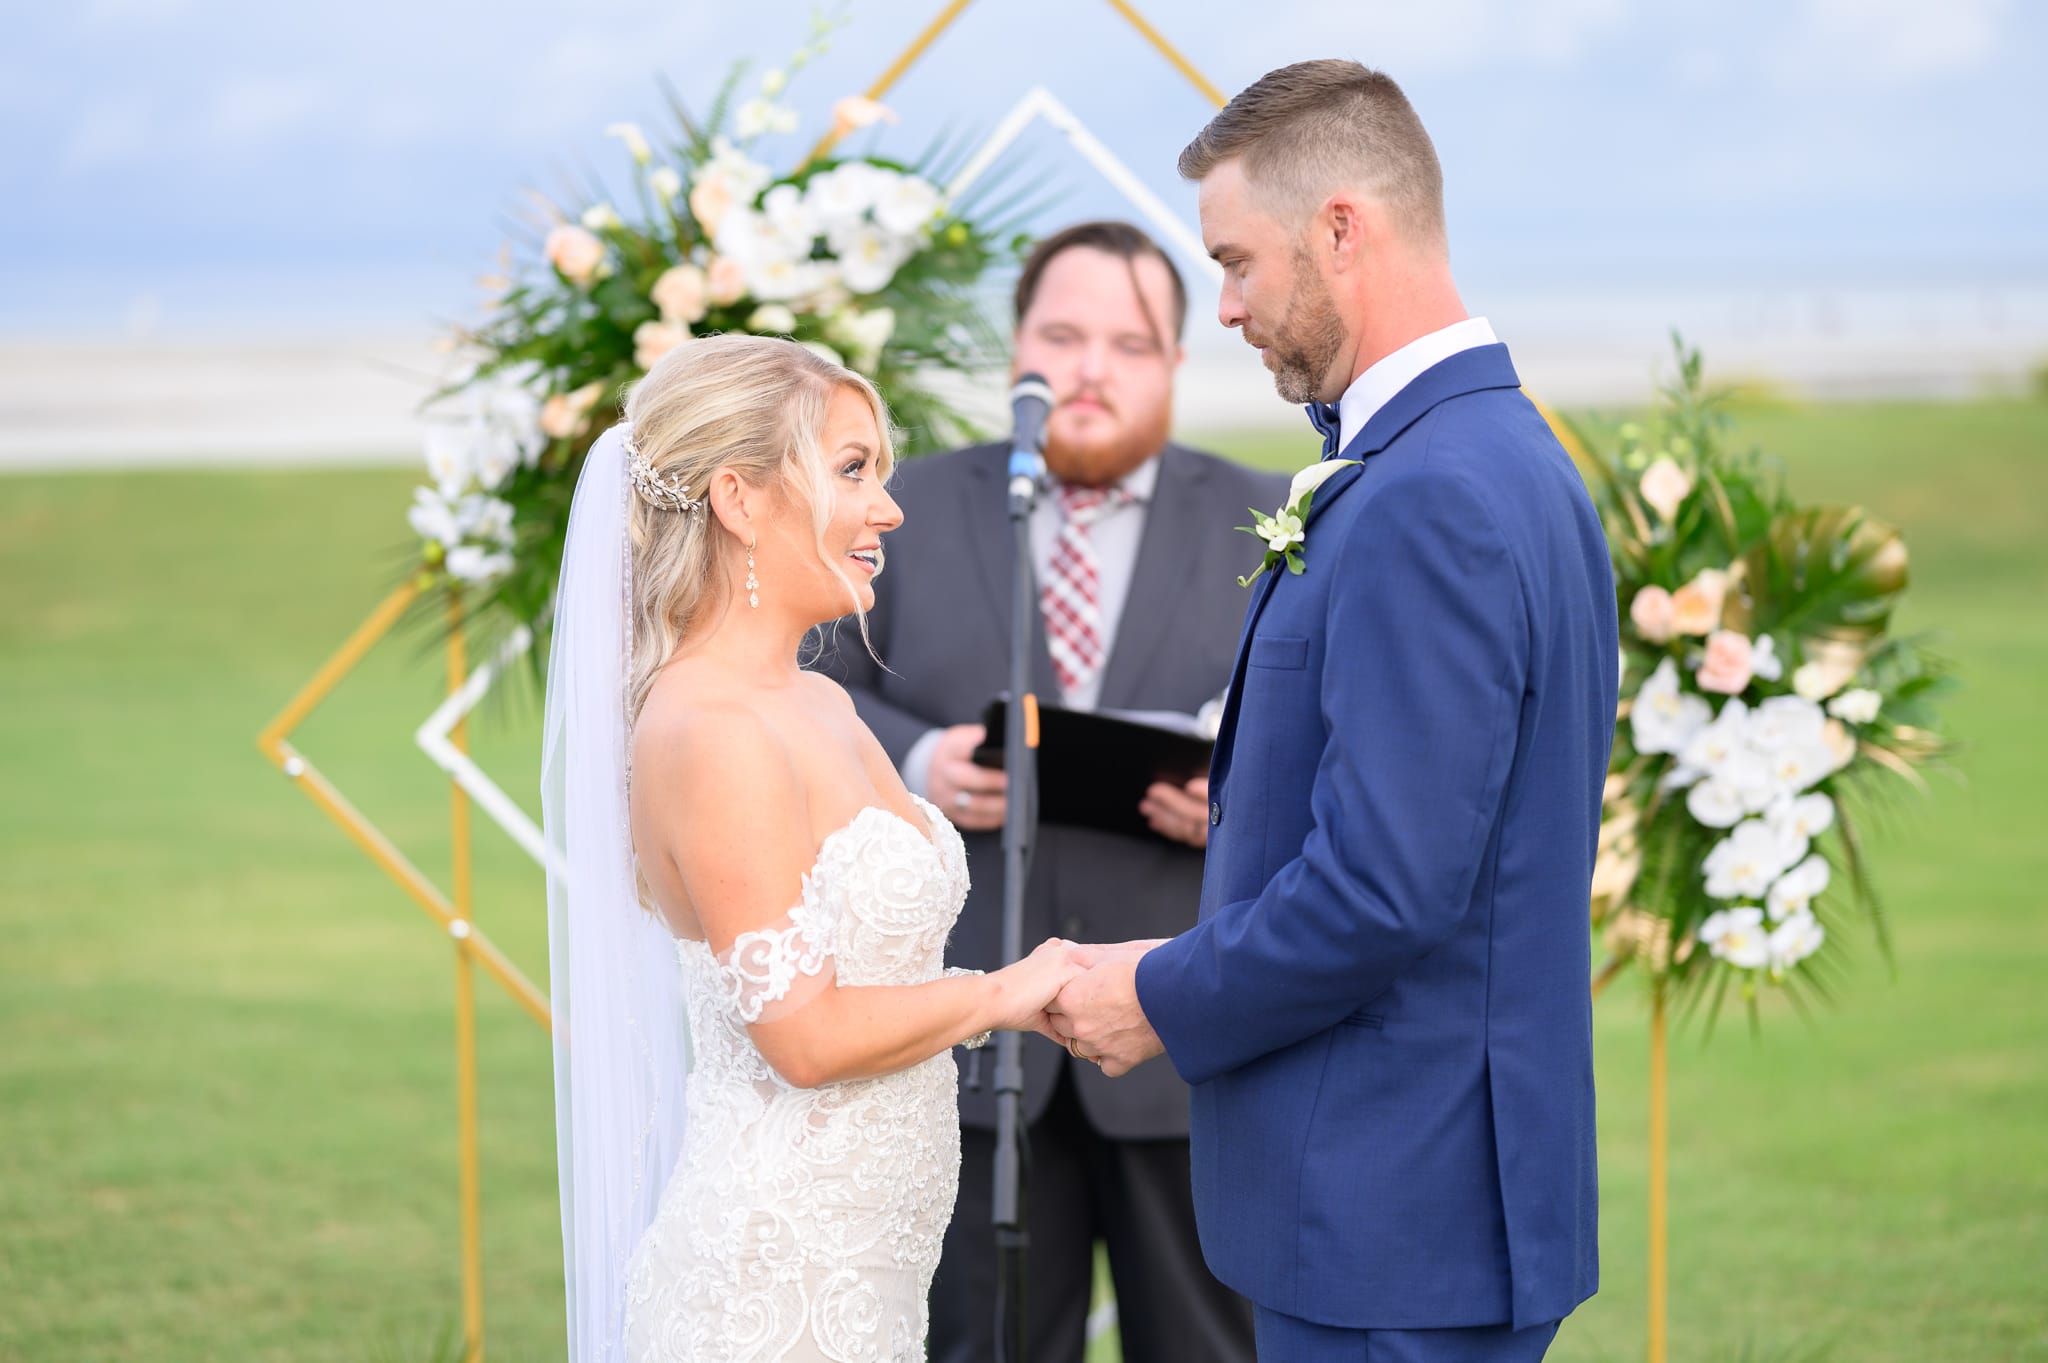 Holding hands during vows - Dunes Golf and Beach Club